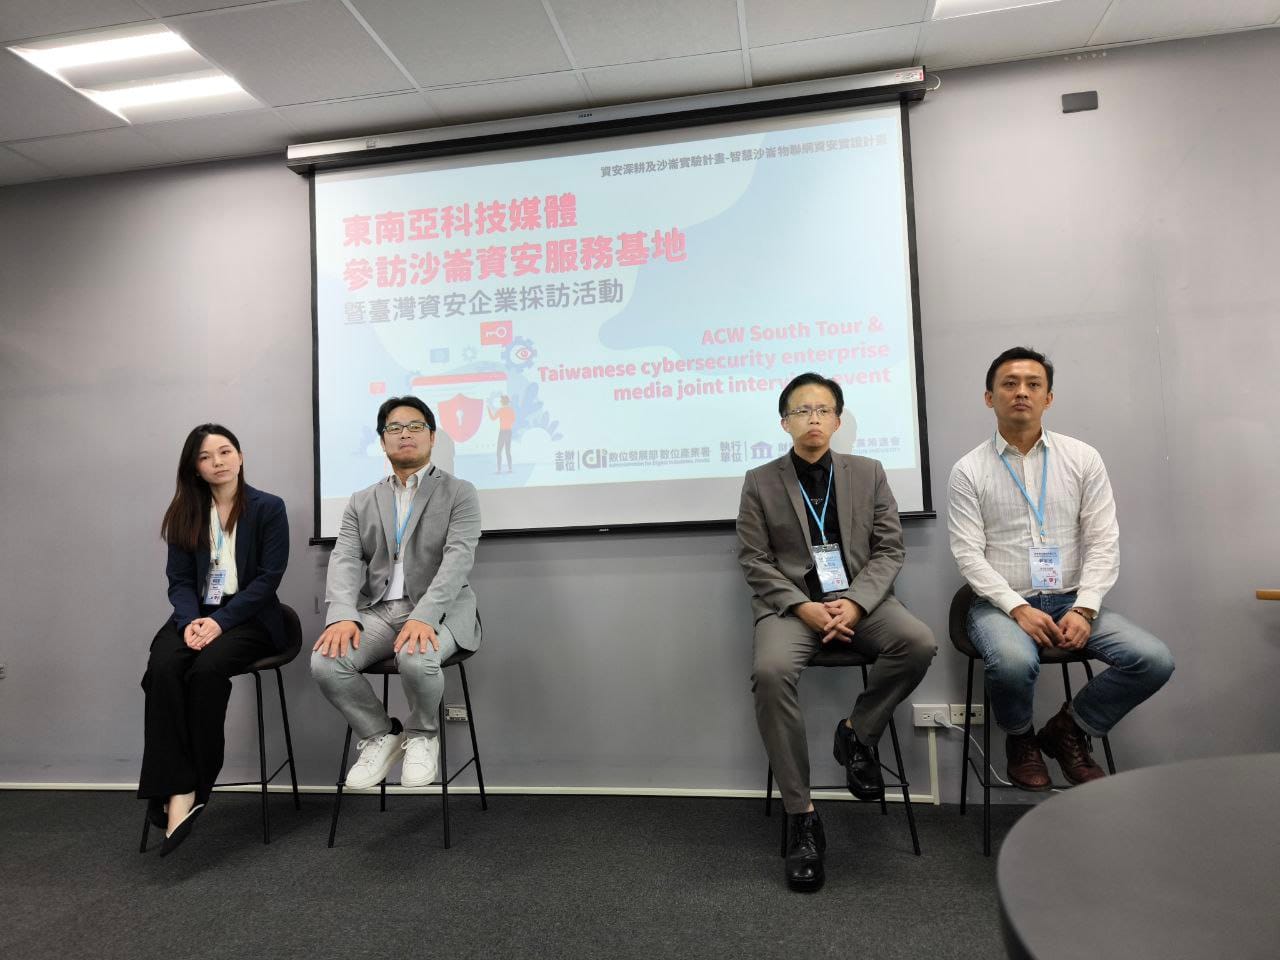 Unlocking Taiwan's Cybersecurity Excellence: ACW South